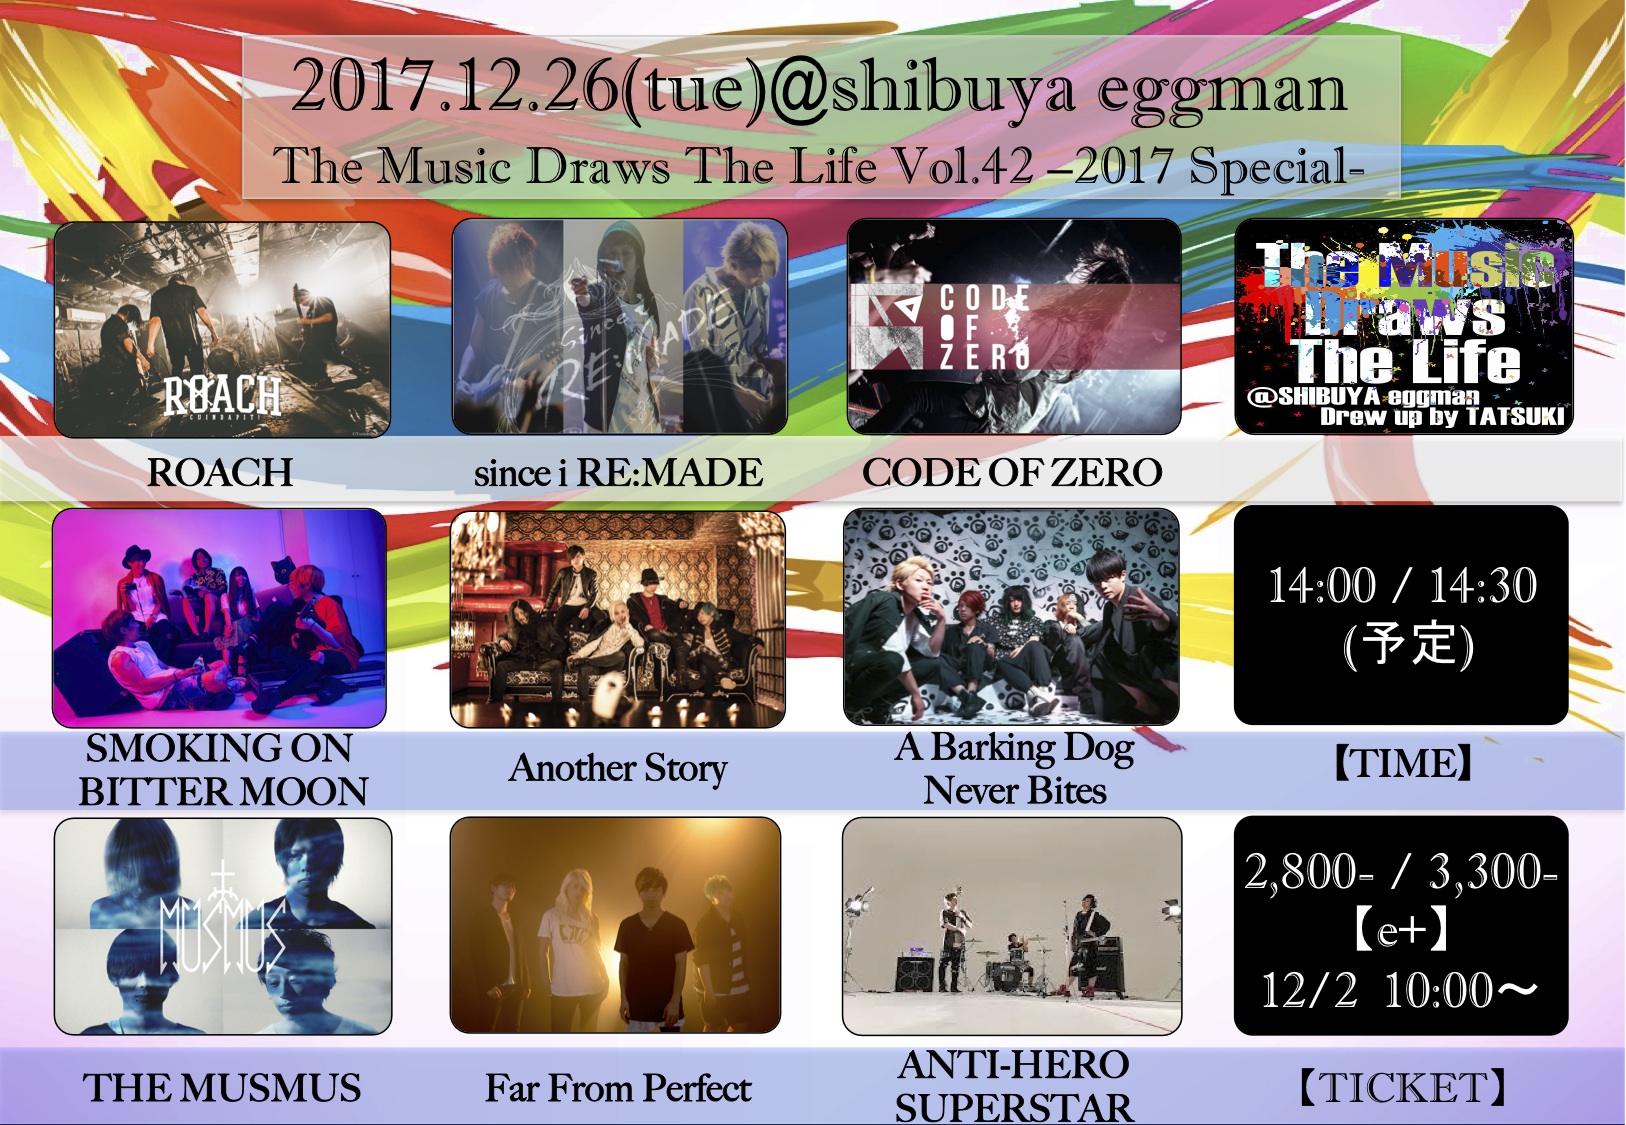 The Music Draws The Life Vol.42 -2017 Special-